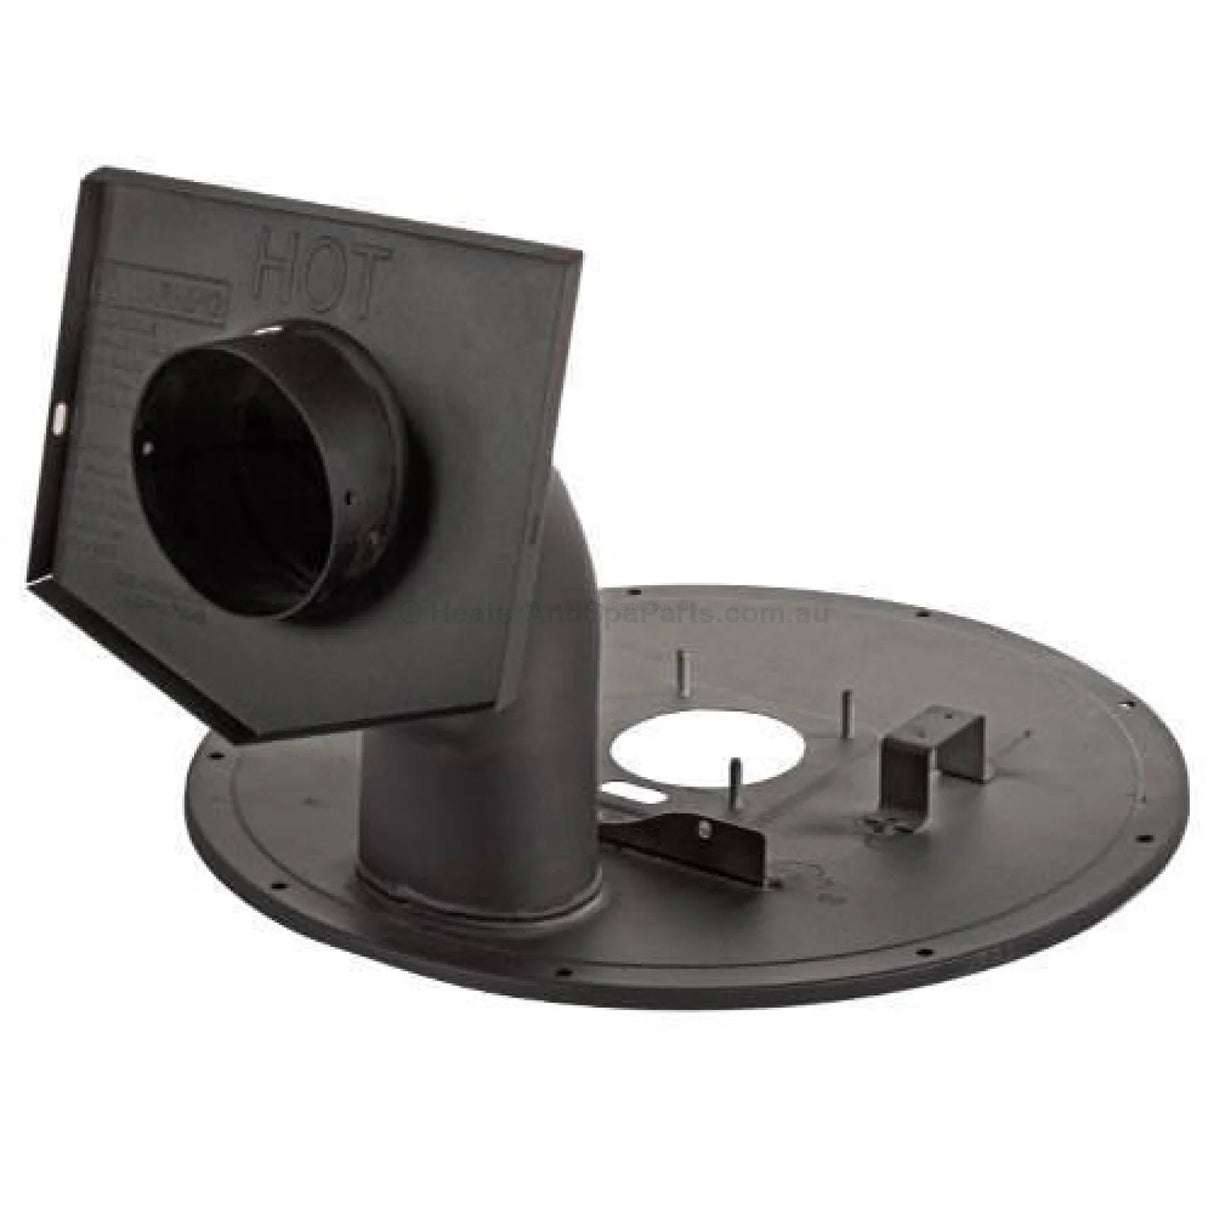 Pentair Mastertemp - Combustion Chamber Top w/ Elbowed Flue - Heater and Spa Parts